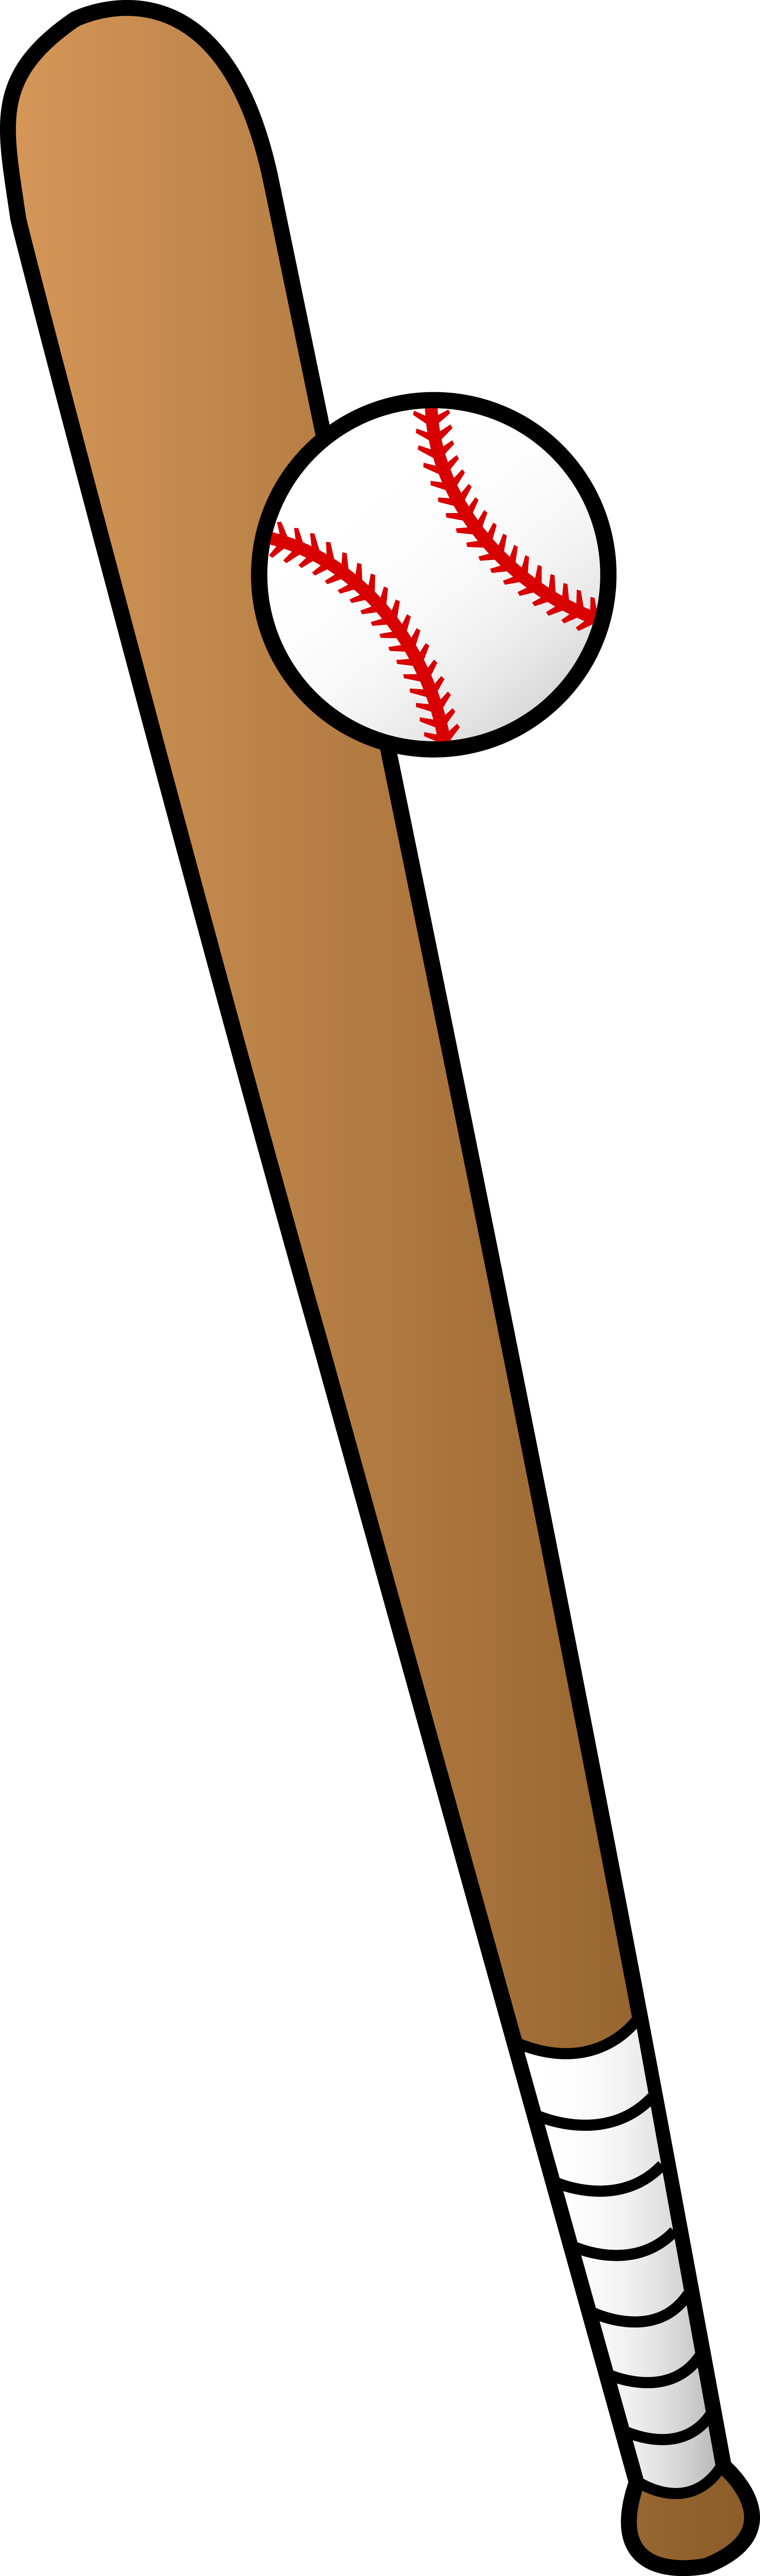 Picture Of A Baseball Bat